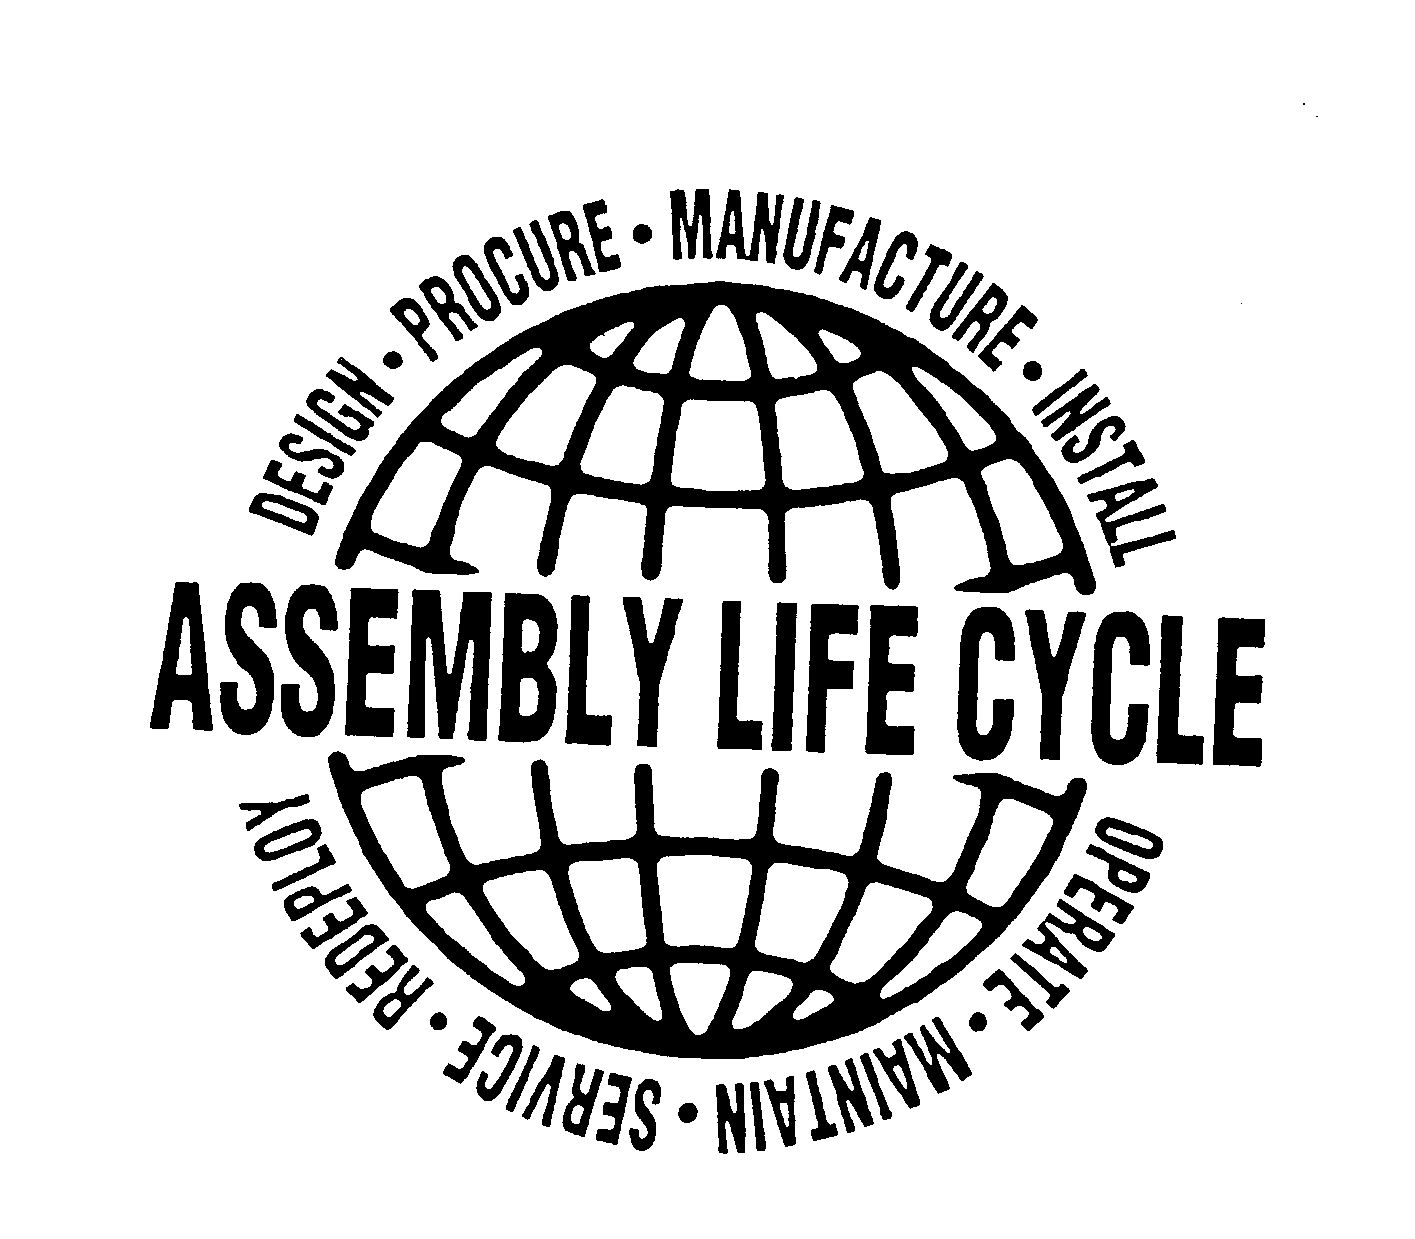  ASSEMBLY LIFE CYCLE DESIGN PROCURE MANUFACTURE INSTALL OPERATE MAINTAIN SERVICE REDEPLOY